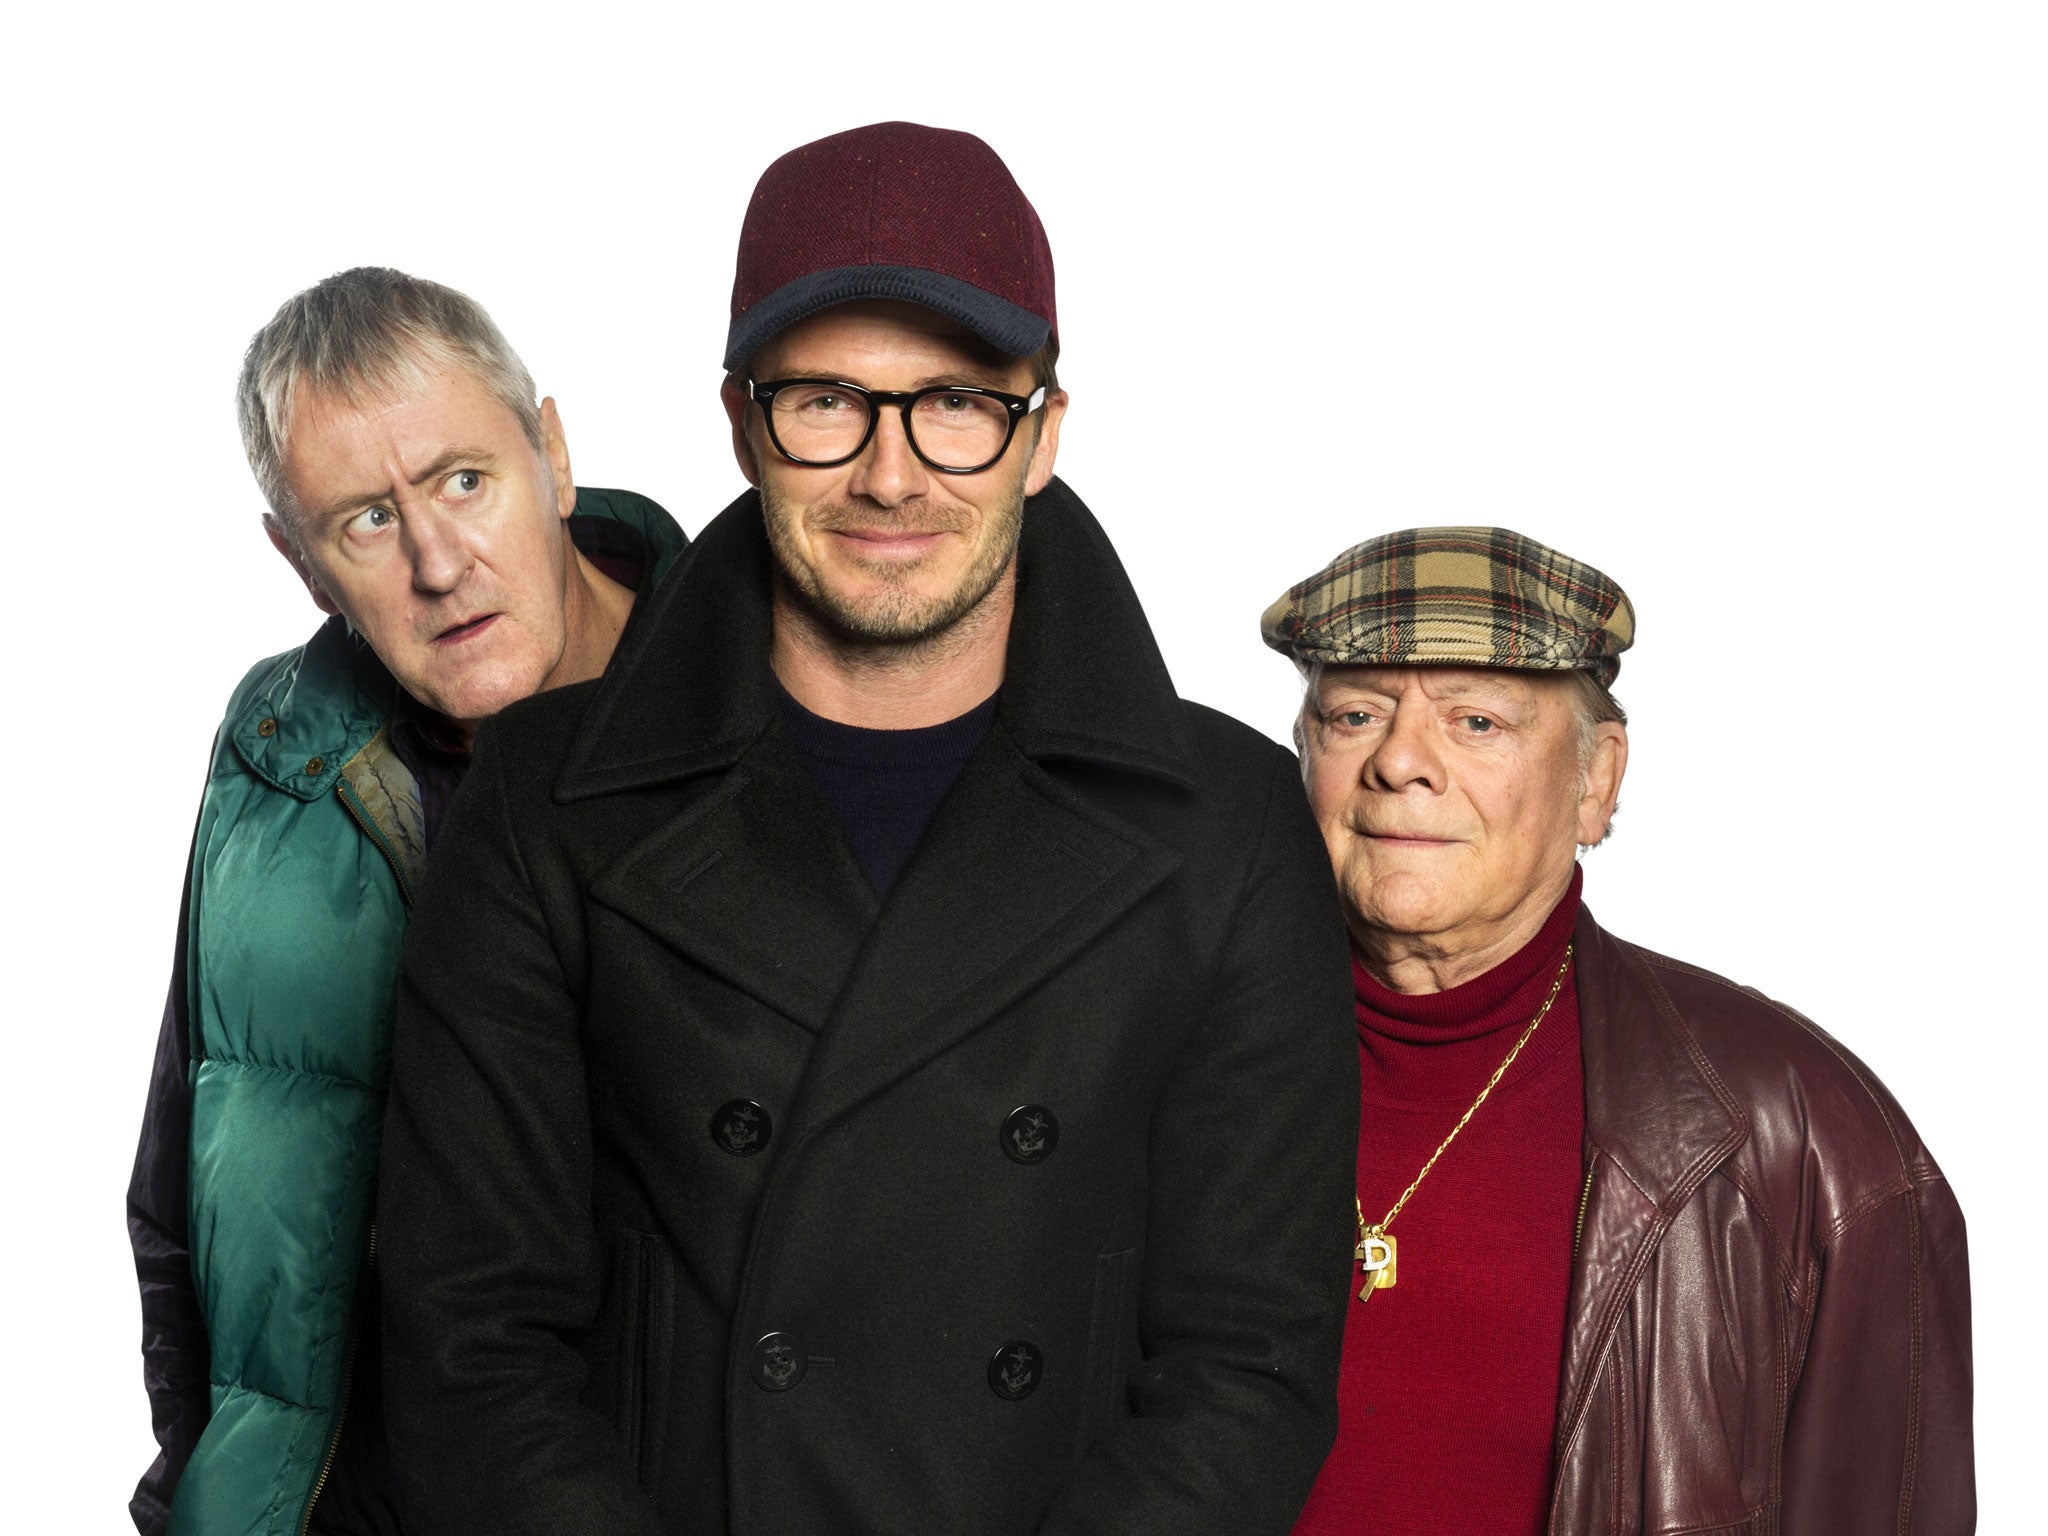 David Beckham with Nicholas Lyndhurst and David Jason from Only Fools and Horses